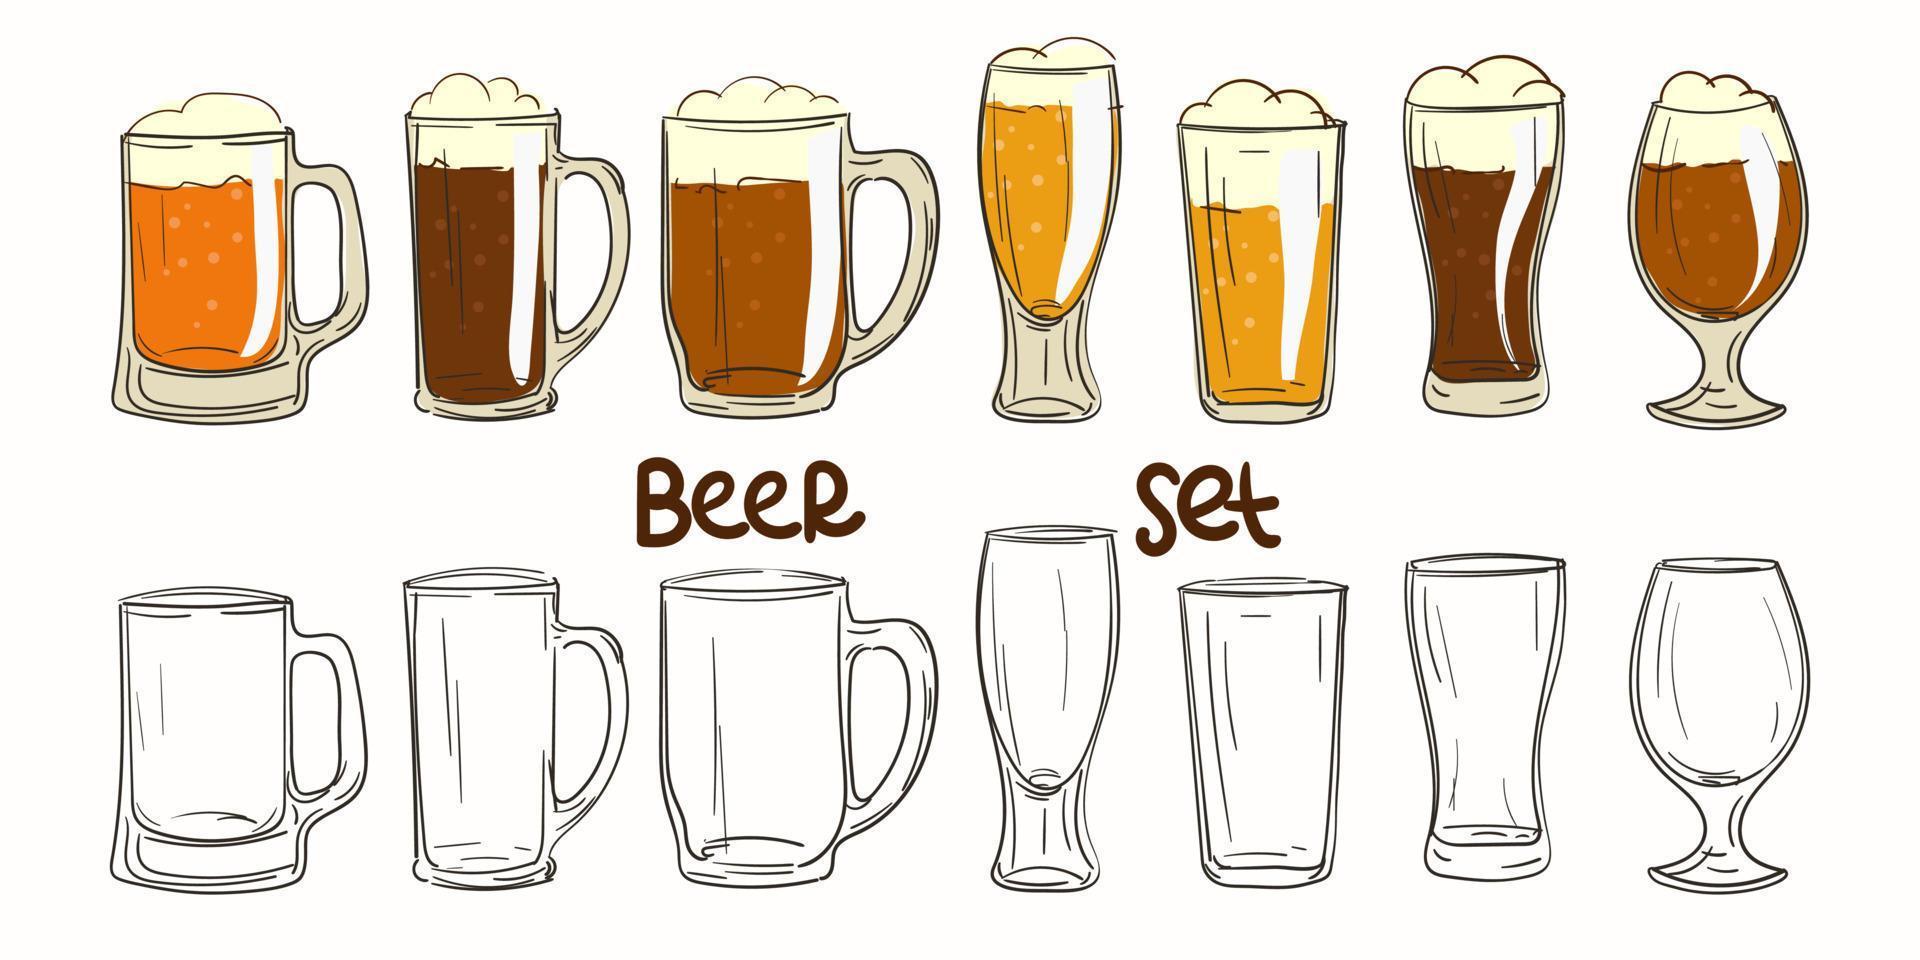 A set of beer glasses, mugs. Graphics and color. Color vintage vector engraving for the internet, poster, party invitation. A hand-drawn design element isolated on a white background.